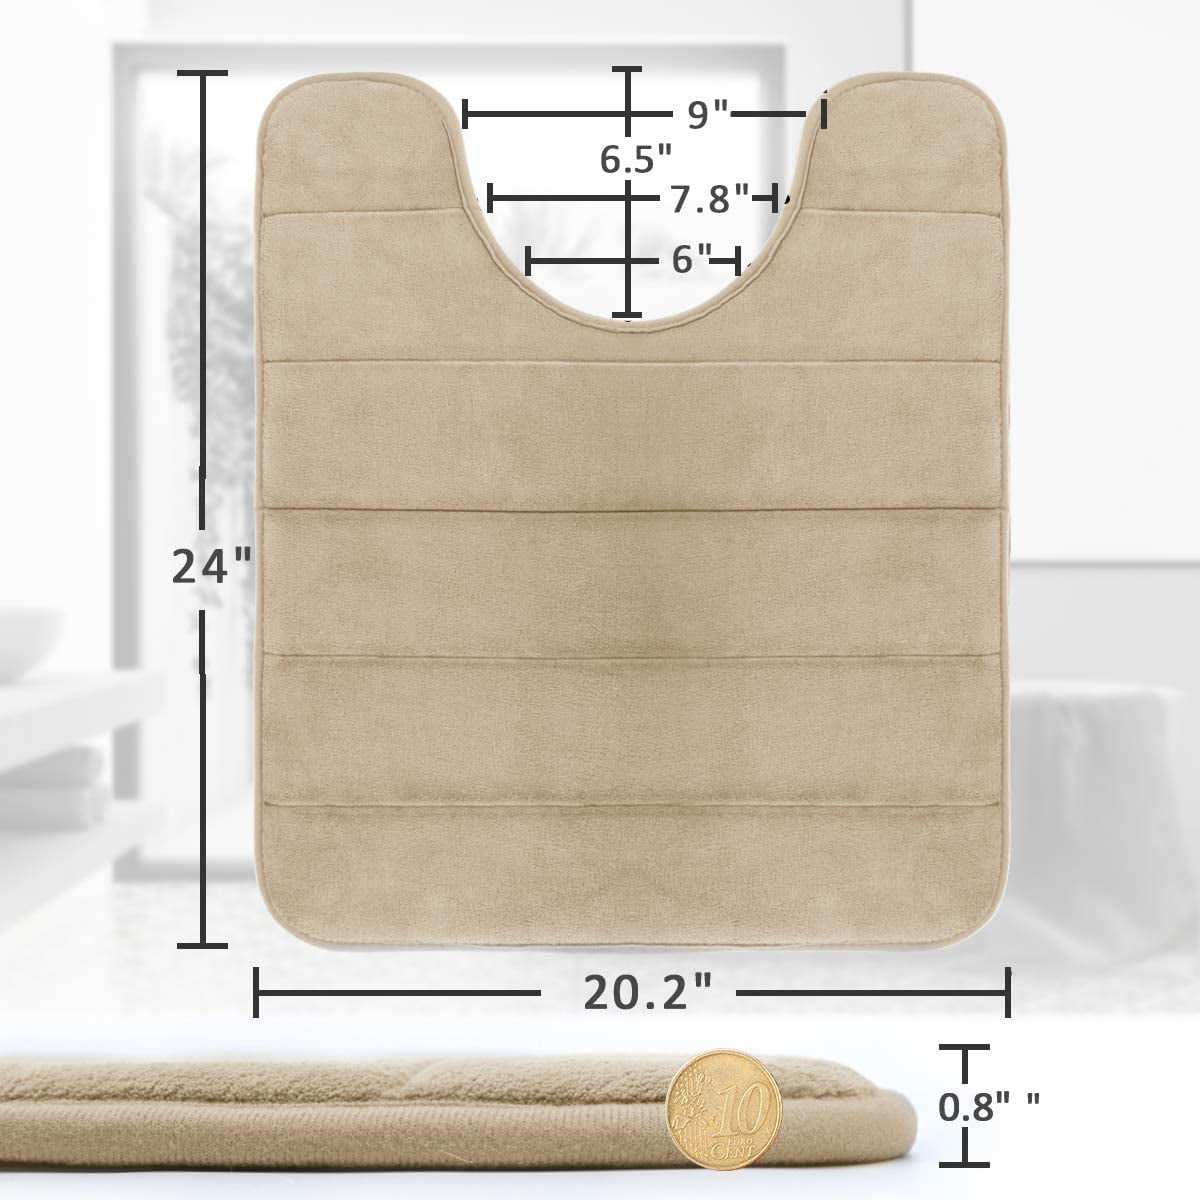 Soft and Comfortable Super Water Absorbent Yimobra Memory Foam Toilet Bath Mat U-Shaped Non-Slip Brown 24 X 20 Inches Machine Wash and Easy to Dry for Bathroom Commode Contour Rug